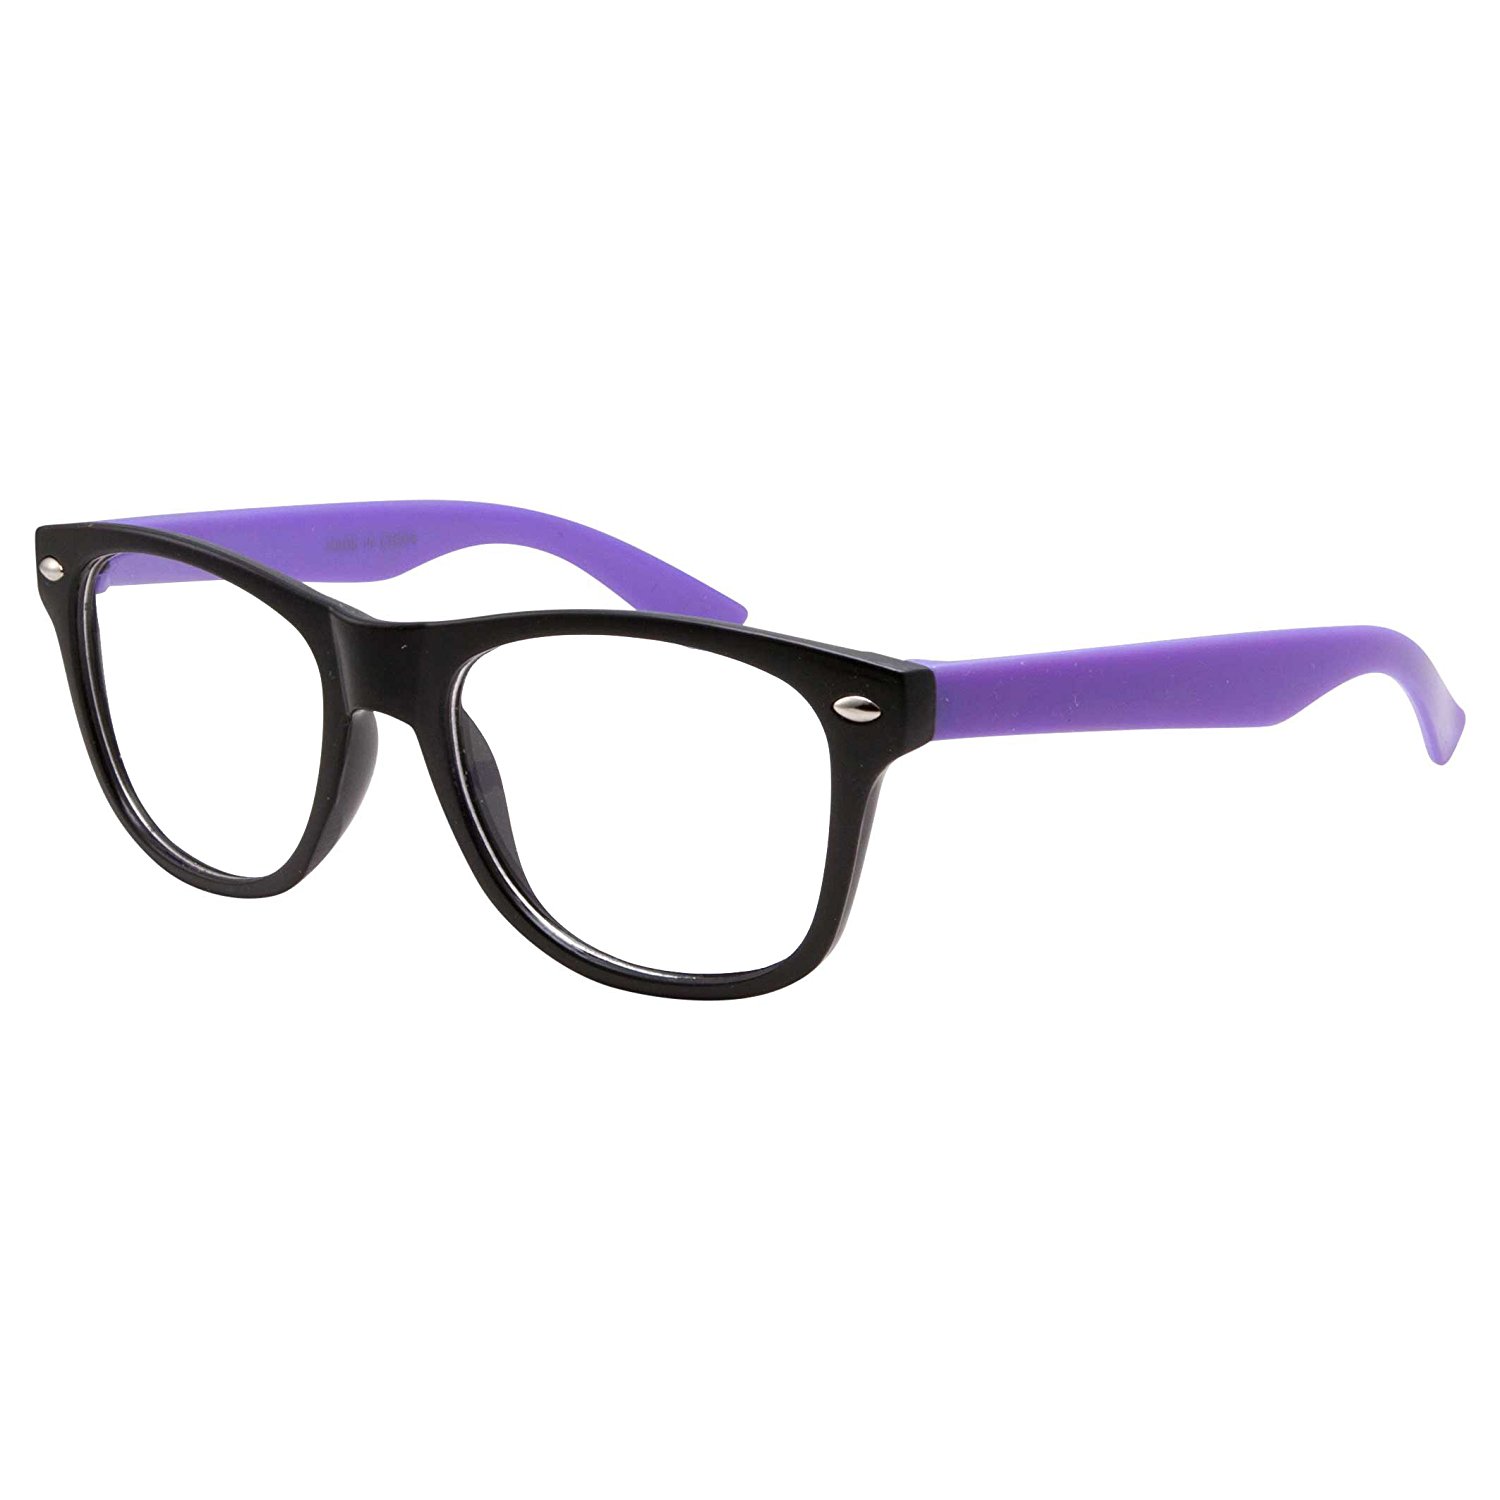 Amazon.com: Kids Nerd Fake Glasses Clear Lens Colored Arms Geek ...